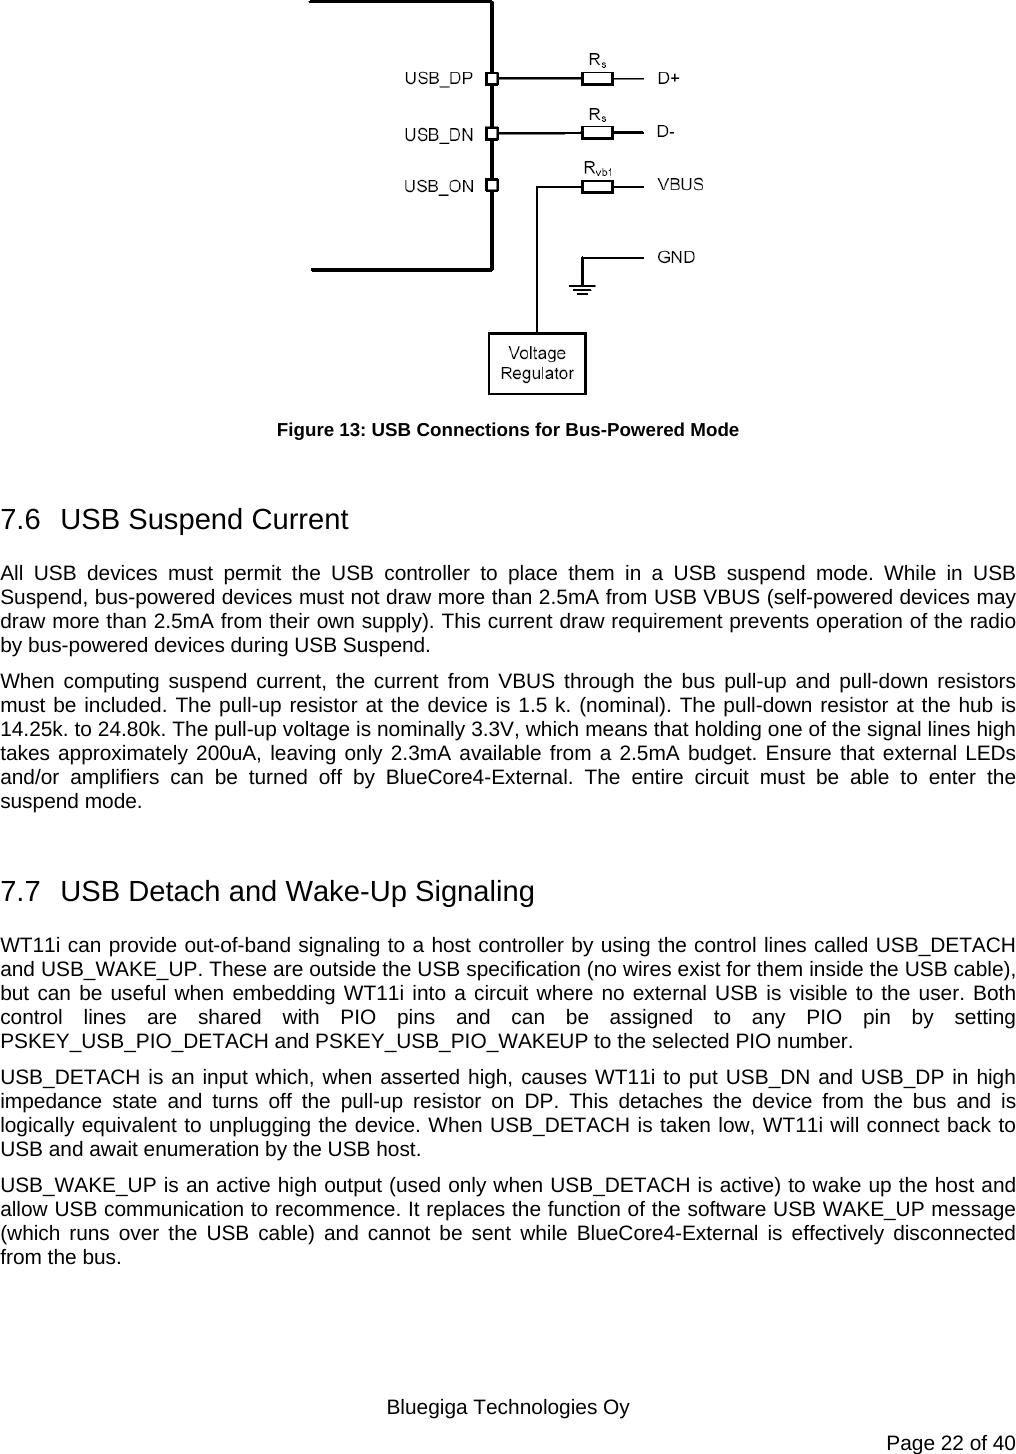   Bluegiga Technologies Oy Page 22 of 40  Figure 13: USB Connections for Bus-Powered Mode  7.6  USB Suspend Current All USB devices must permit the USB controller to place them in a USB suspend mode. While in USB Suspend, bus-powered devices must not draw more than 2.5mA from USB VBUS (self-powered devices may draw more than 2.5mA from their own supply). This current draw requirement prevents operation of the radio by bus-powered devices during USB Suspend. When computing suspend current, the current from VBUS through the bus pull-up and pull-down resistors must be included. The pull-up resistor at the device is 1.5 k. (nominal). The pull-down resistor at the hub is 14.25k. to 24.80k. The pull-up voltage is nominally 3.3V, which means that holding one of the signal lines high takes approximately 200uA, leaving only 2.3mA available from a 2.5mA budget. Ensure that external LEDs and/or amplifiers can be turned off by BlueCore4-External. The entire circuit must be able to enter the suspend mode.  7.7  USB Detach and Wake-Up Signaling WT11i can provide out-of-band signaling to a host controller by using the control lines called USB_DETACH and USB_WAKE_UP. These are outside the USB specification (no wires exist for them inside the USB cable), but can be useful when embedding WT11i into a circuit where no external USB is visible to the user. Both control lines are shared with PIO pins and can be assigned to any PIO pin by setting PSKEY_USB_PIO_DETACH and PSKEY_USB_PIO_WAKEUP to the selected PIO number. USB_DETACH is an input which, when asserted high, causes WT11i to put USB_DN and USB_DP in high impedance state and turns off the pull-up resistor on DP. This detaches the device from the bus and is logically equivalent to unplugging the device. When USB_DETACH is taken low, WT11i will connect back to USB and await enumeration by the USB host. USB_WAKE_UP is an active high output (used only when USB_DETACH is active) to wake up the host and allow USB communication to recommence. It replaces the function of the software USB WAKE_UP message (which runs over the USB cable) and cannot be sent while BlueCore4-External is effectively disconnected from the bus. 